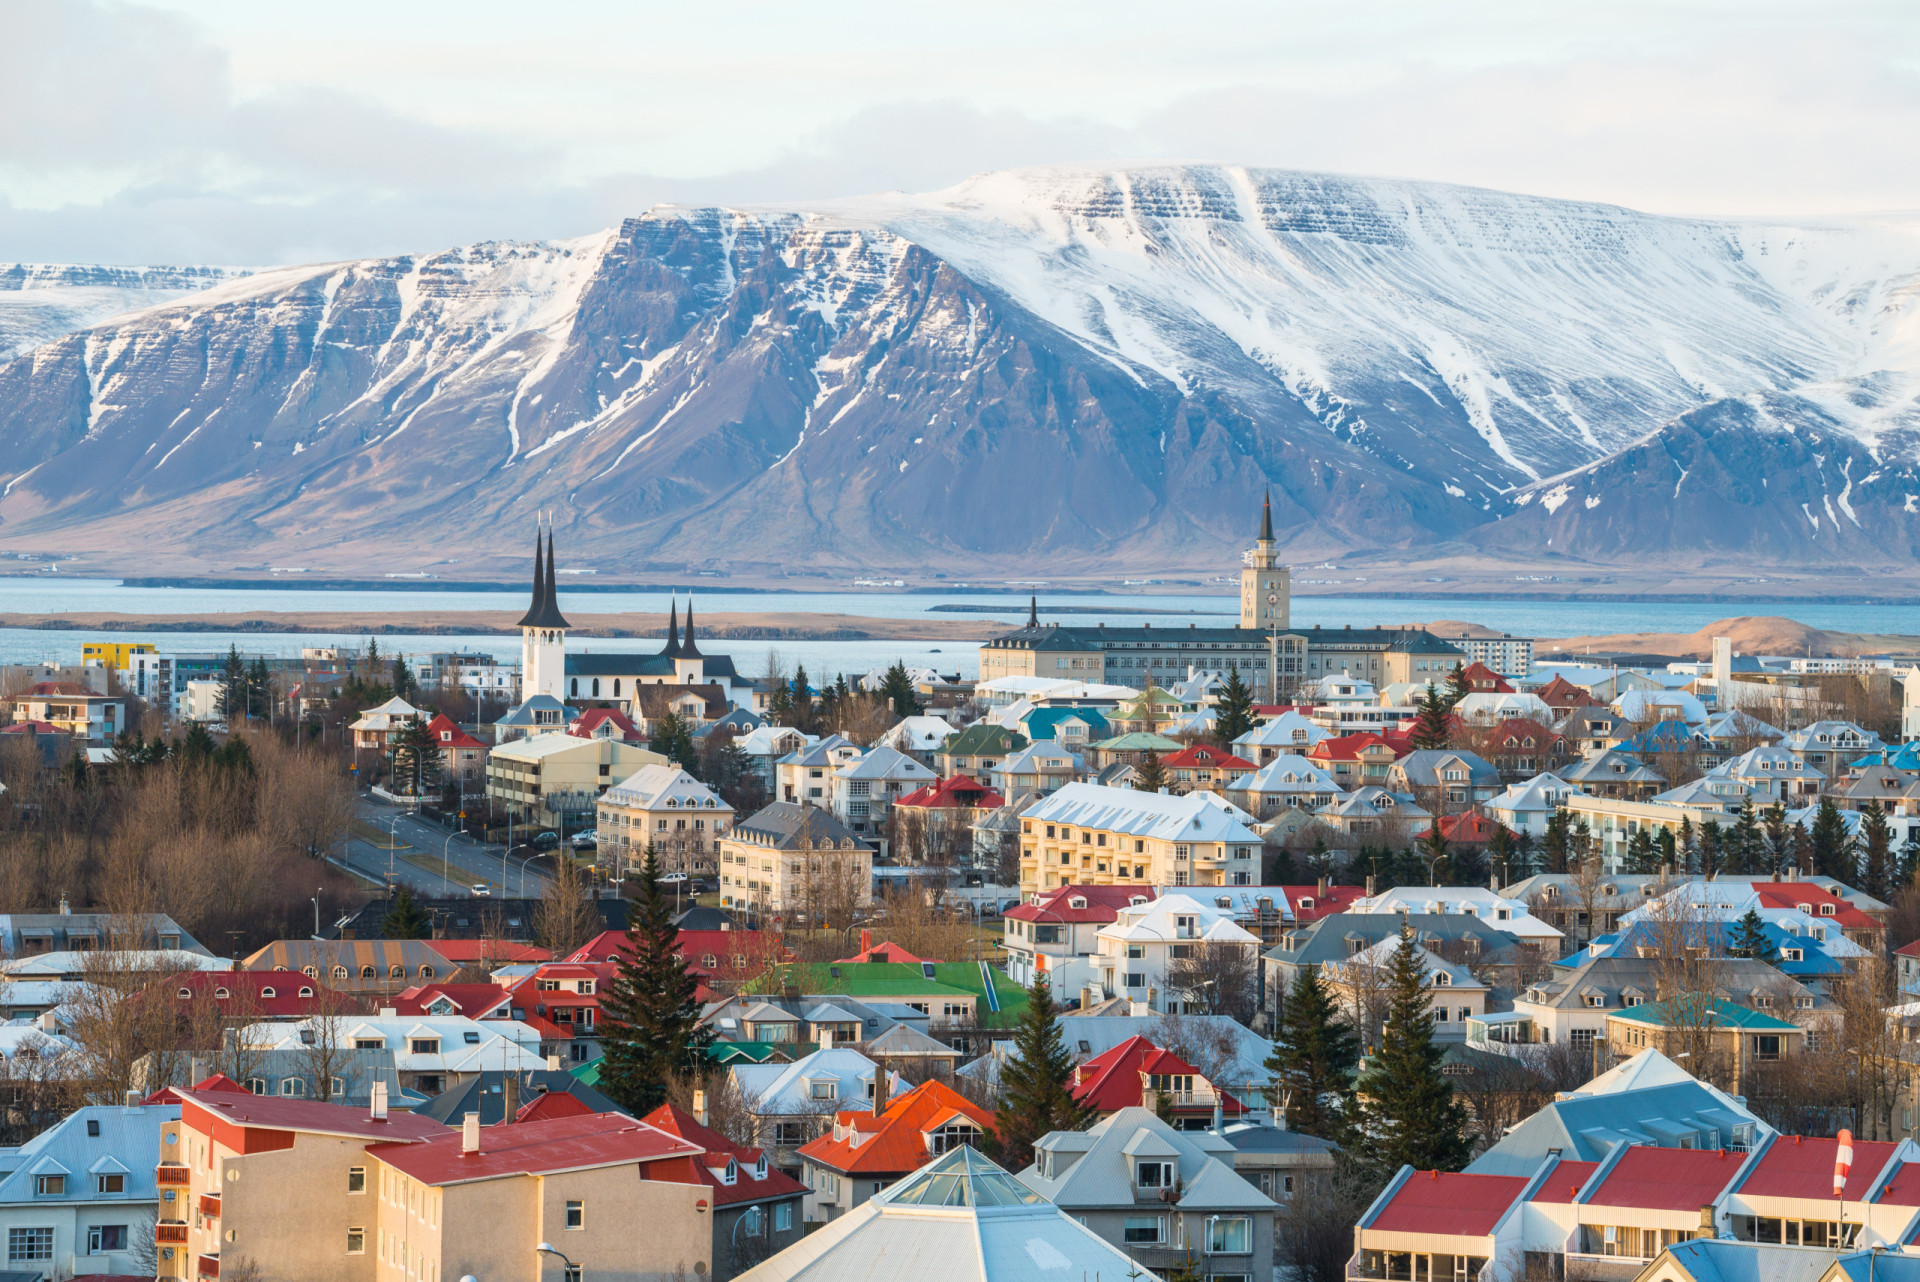 <p>Since January 2024, Iceland has reinstated their tourist tax, which costs US$4.36 per night. It comes after annual tourist numbers reached an estimated 2.3 million per year.</p><p><a href="https://www.msn.com/en-my/community/channel/vid-7xx8mnucu55yw63we9va2gwr7uihbxwc68fxqp25x6tg4ftibpra?cvid=94631541bc0f4f89bfd59158d696ad7e">Follow us and access great exclusive content every day</a></p>